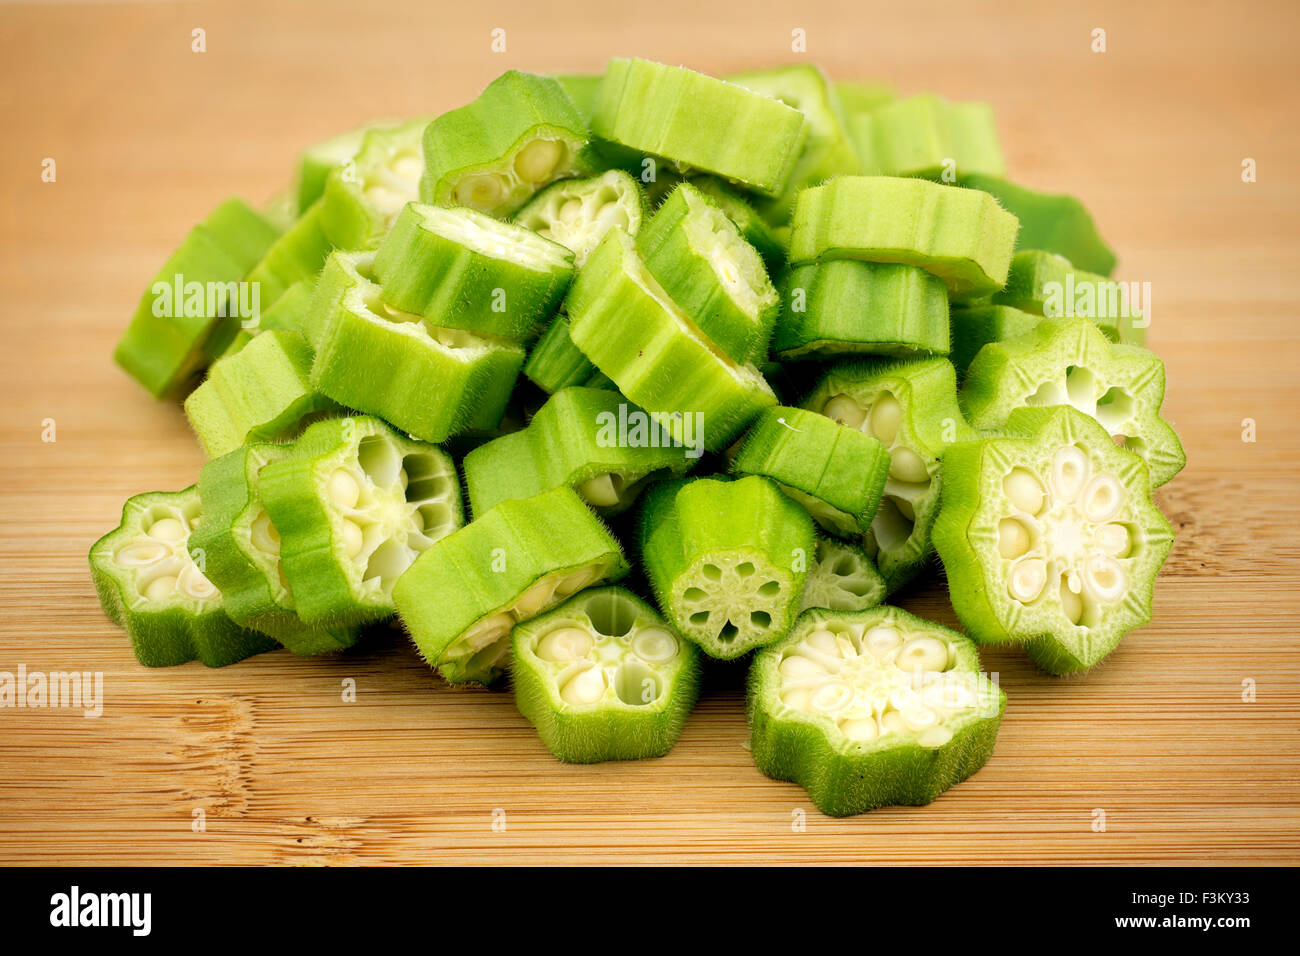 Pile of sliced okra bhindi pieces on rustic wooden background Stock Photo